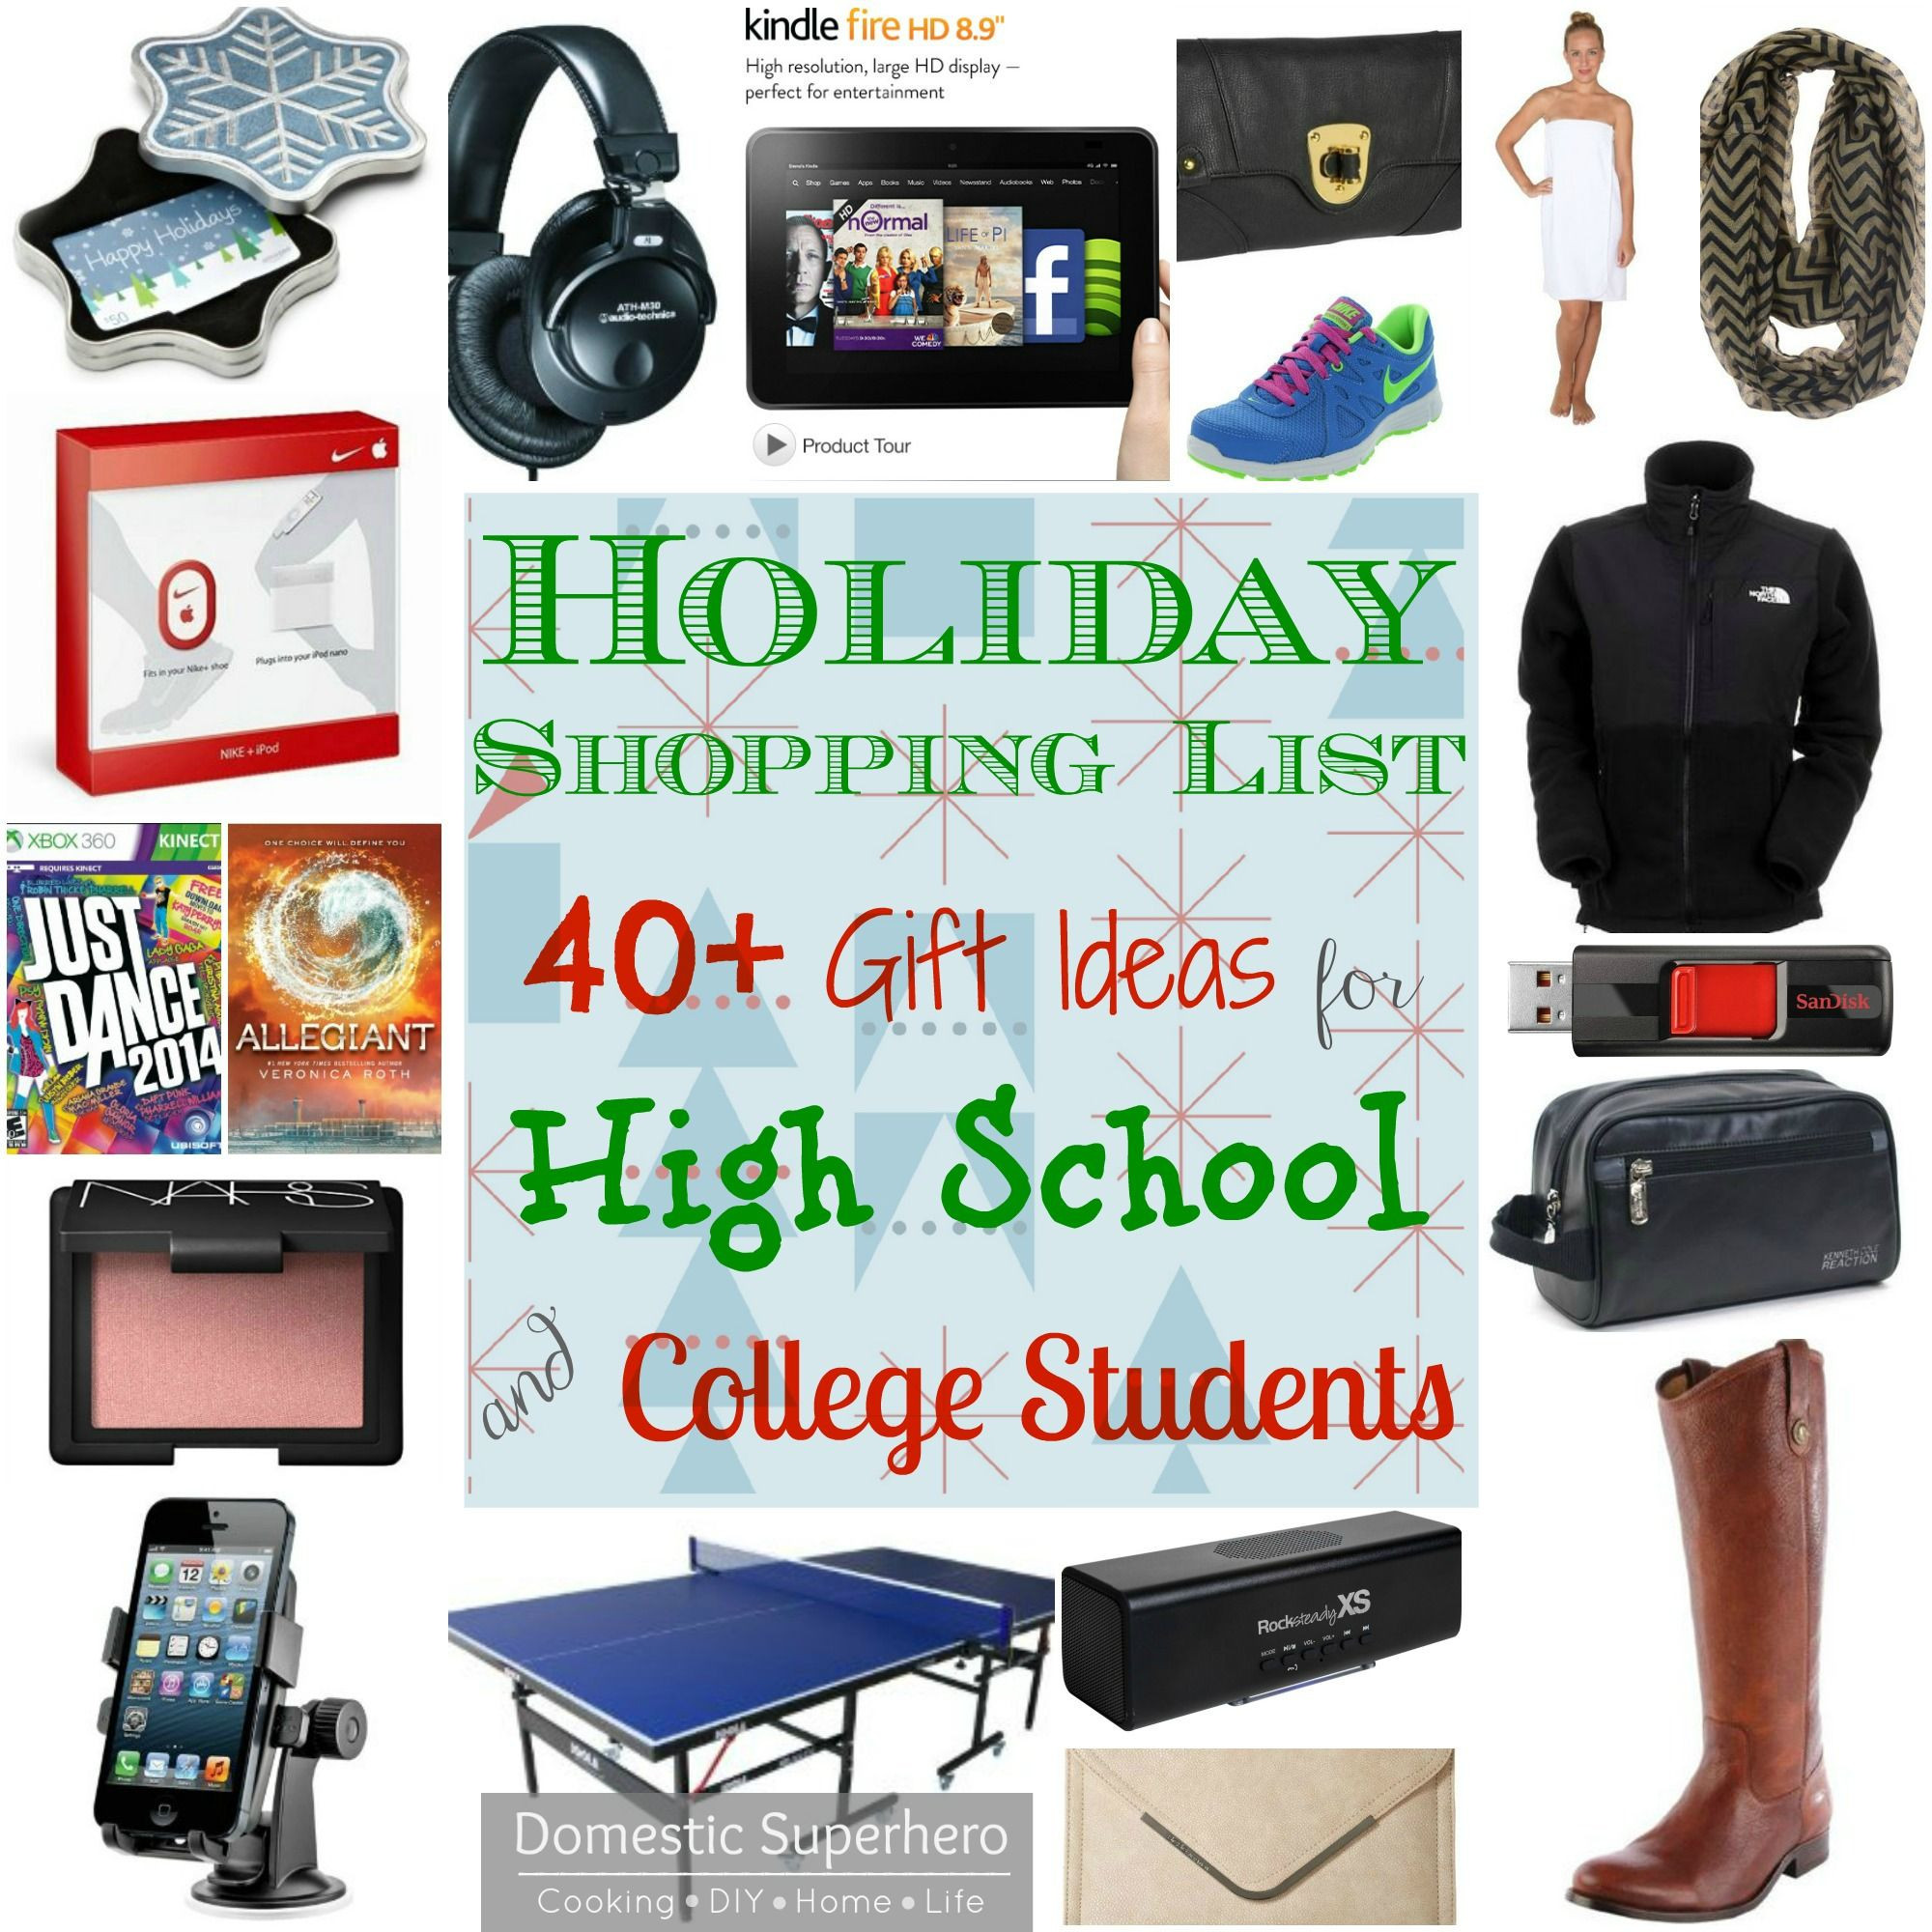 College Student Christmas Gift Ideas
 Holiday Shopping List 40 Gift Ideas for High School and